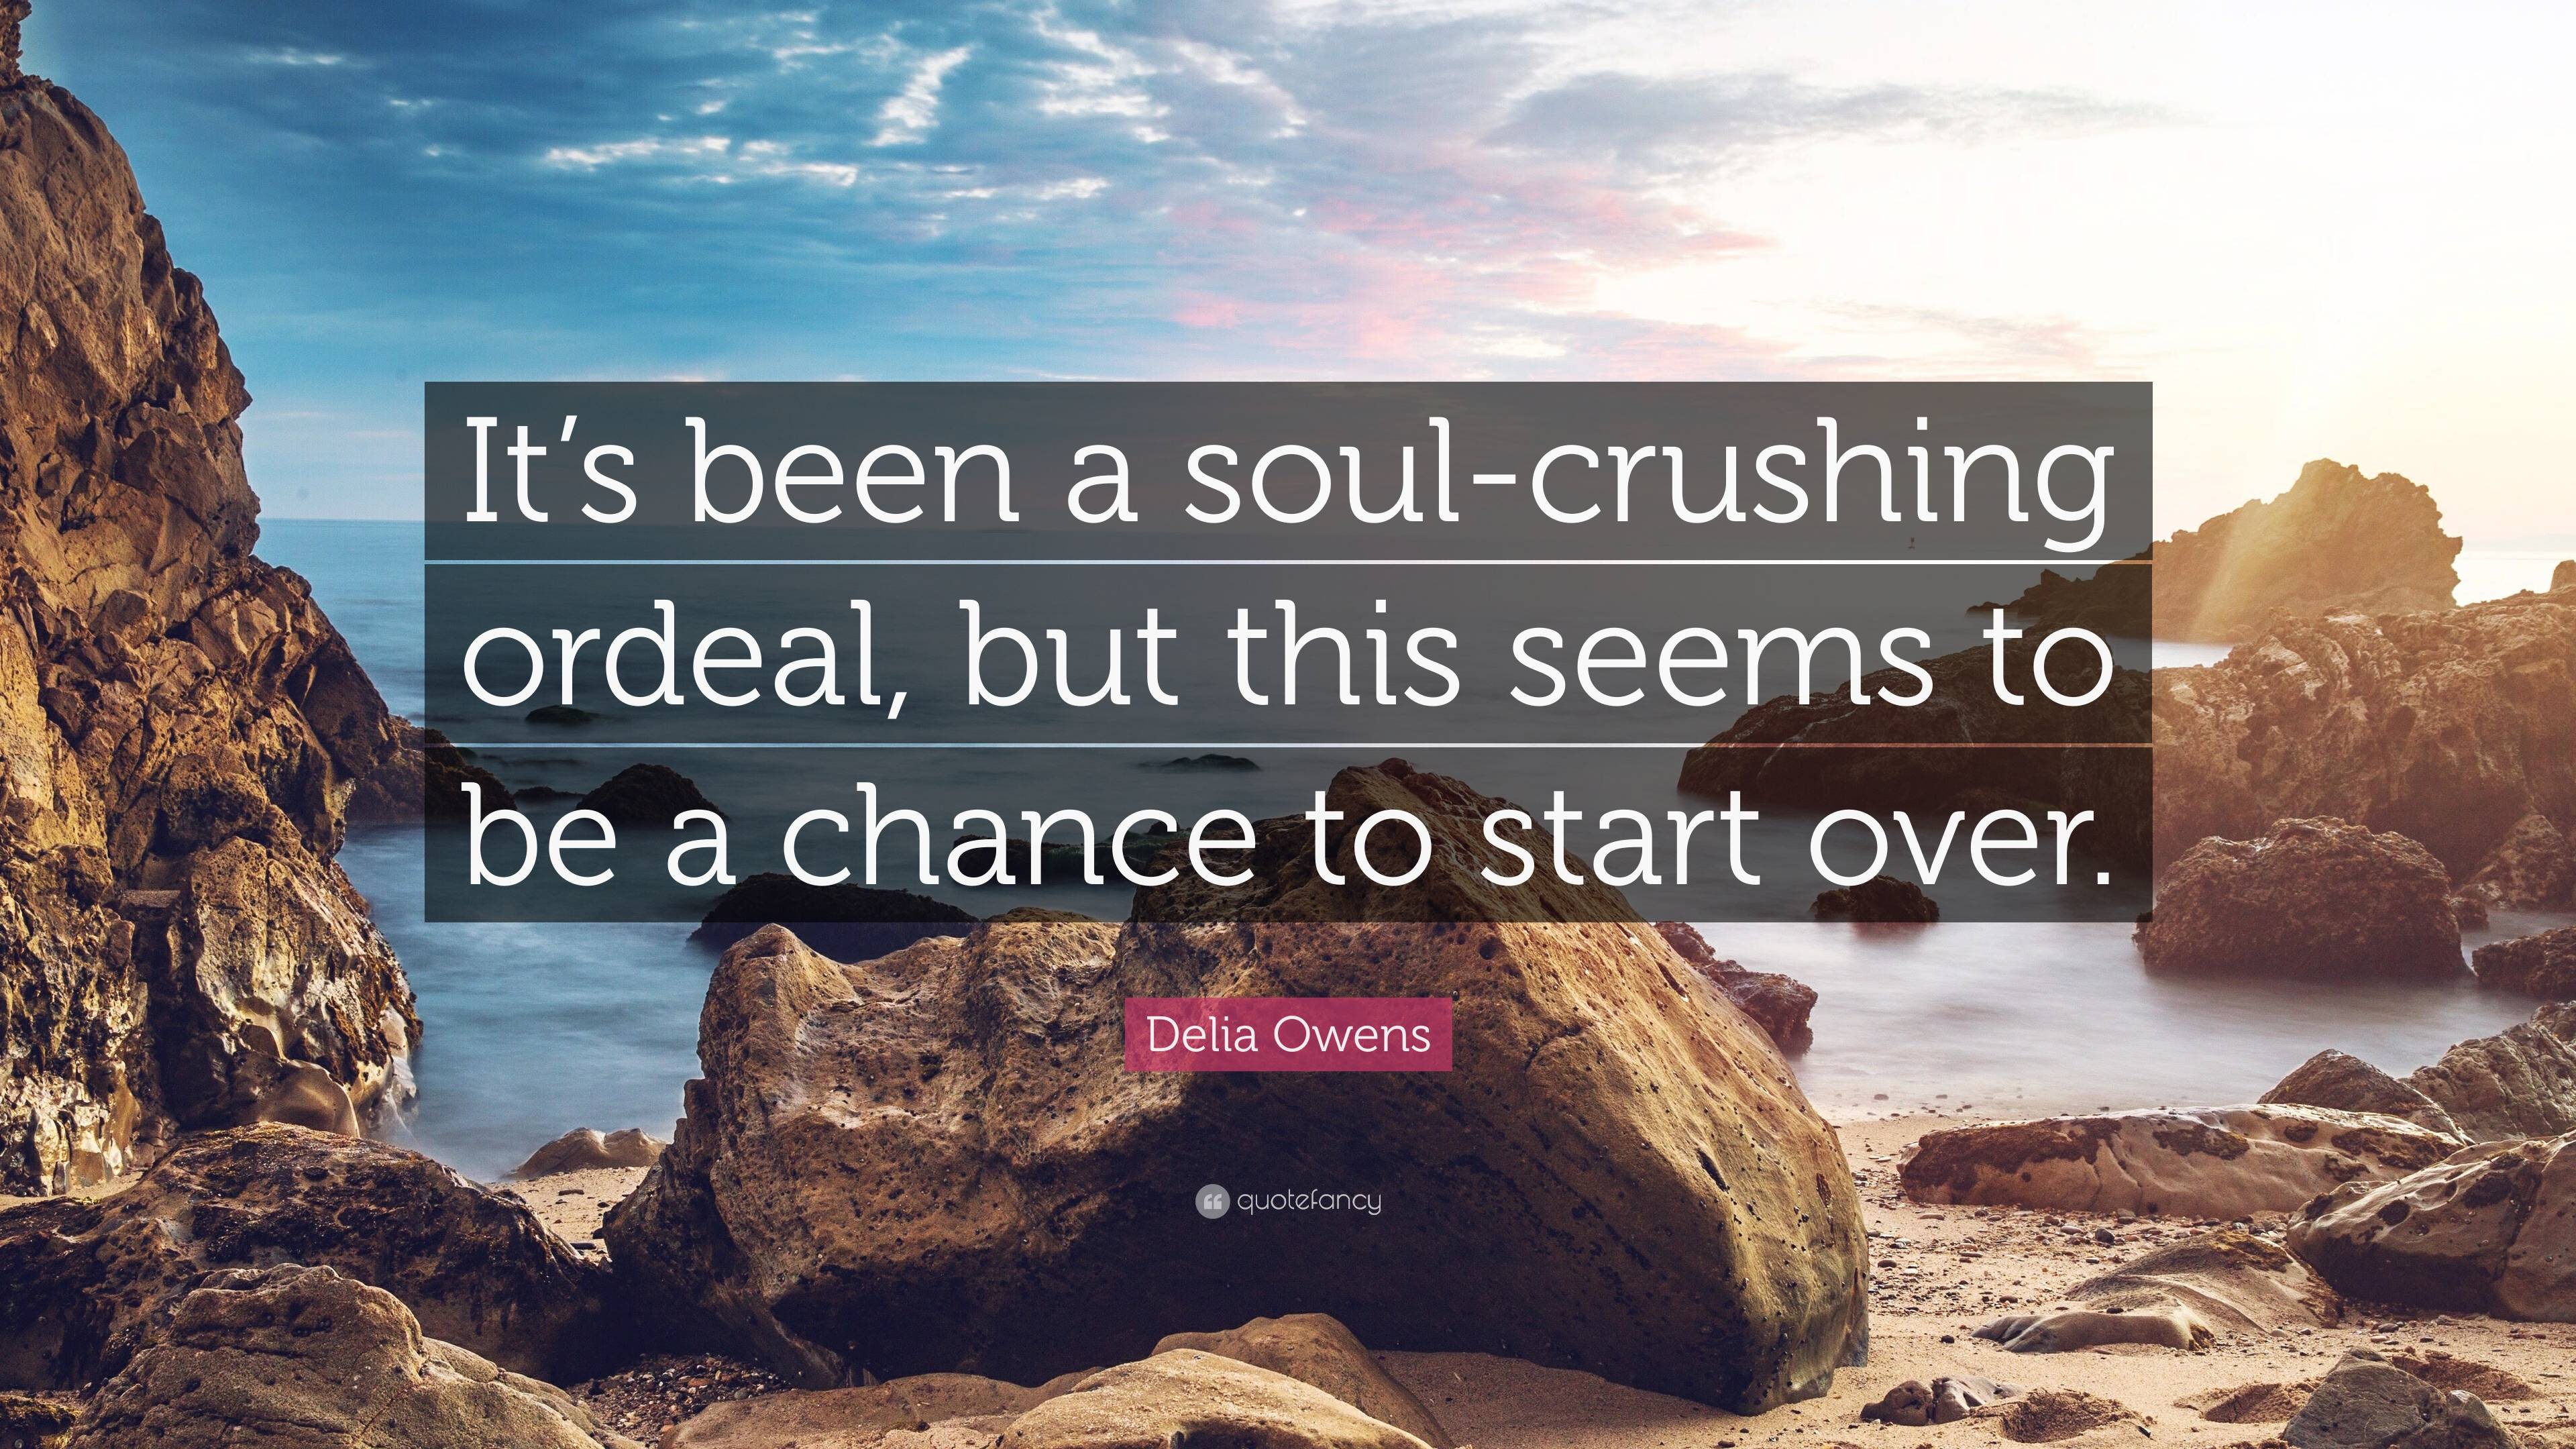 Delia Owens Quote: “It’s been a soul-crushing ordeal, but this seems to ...